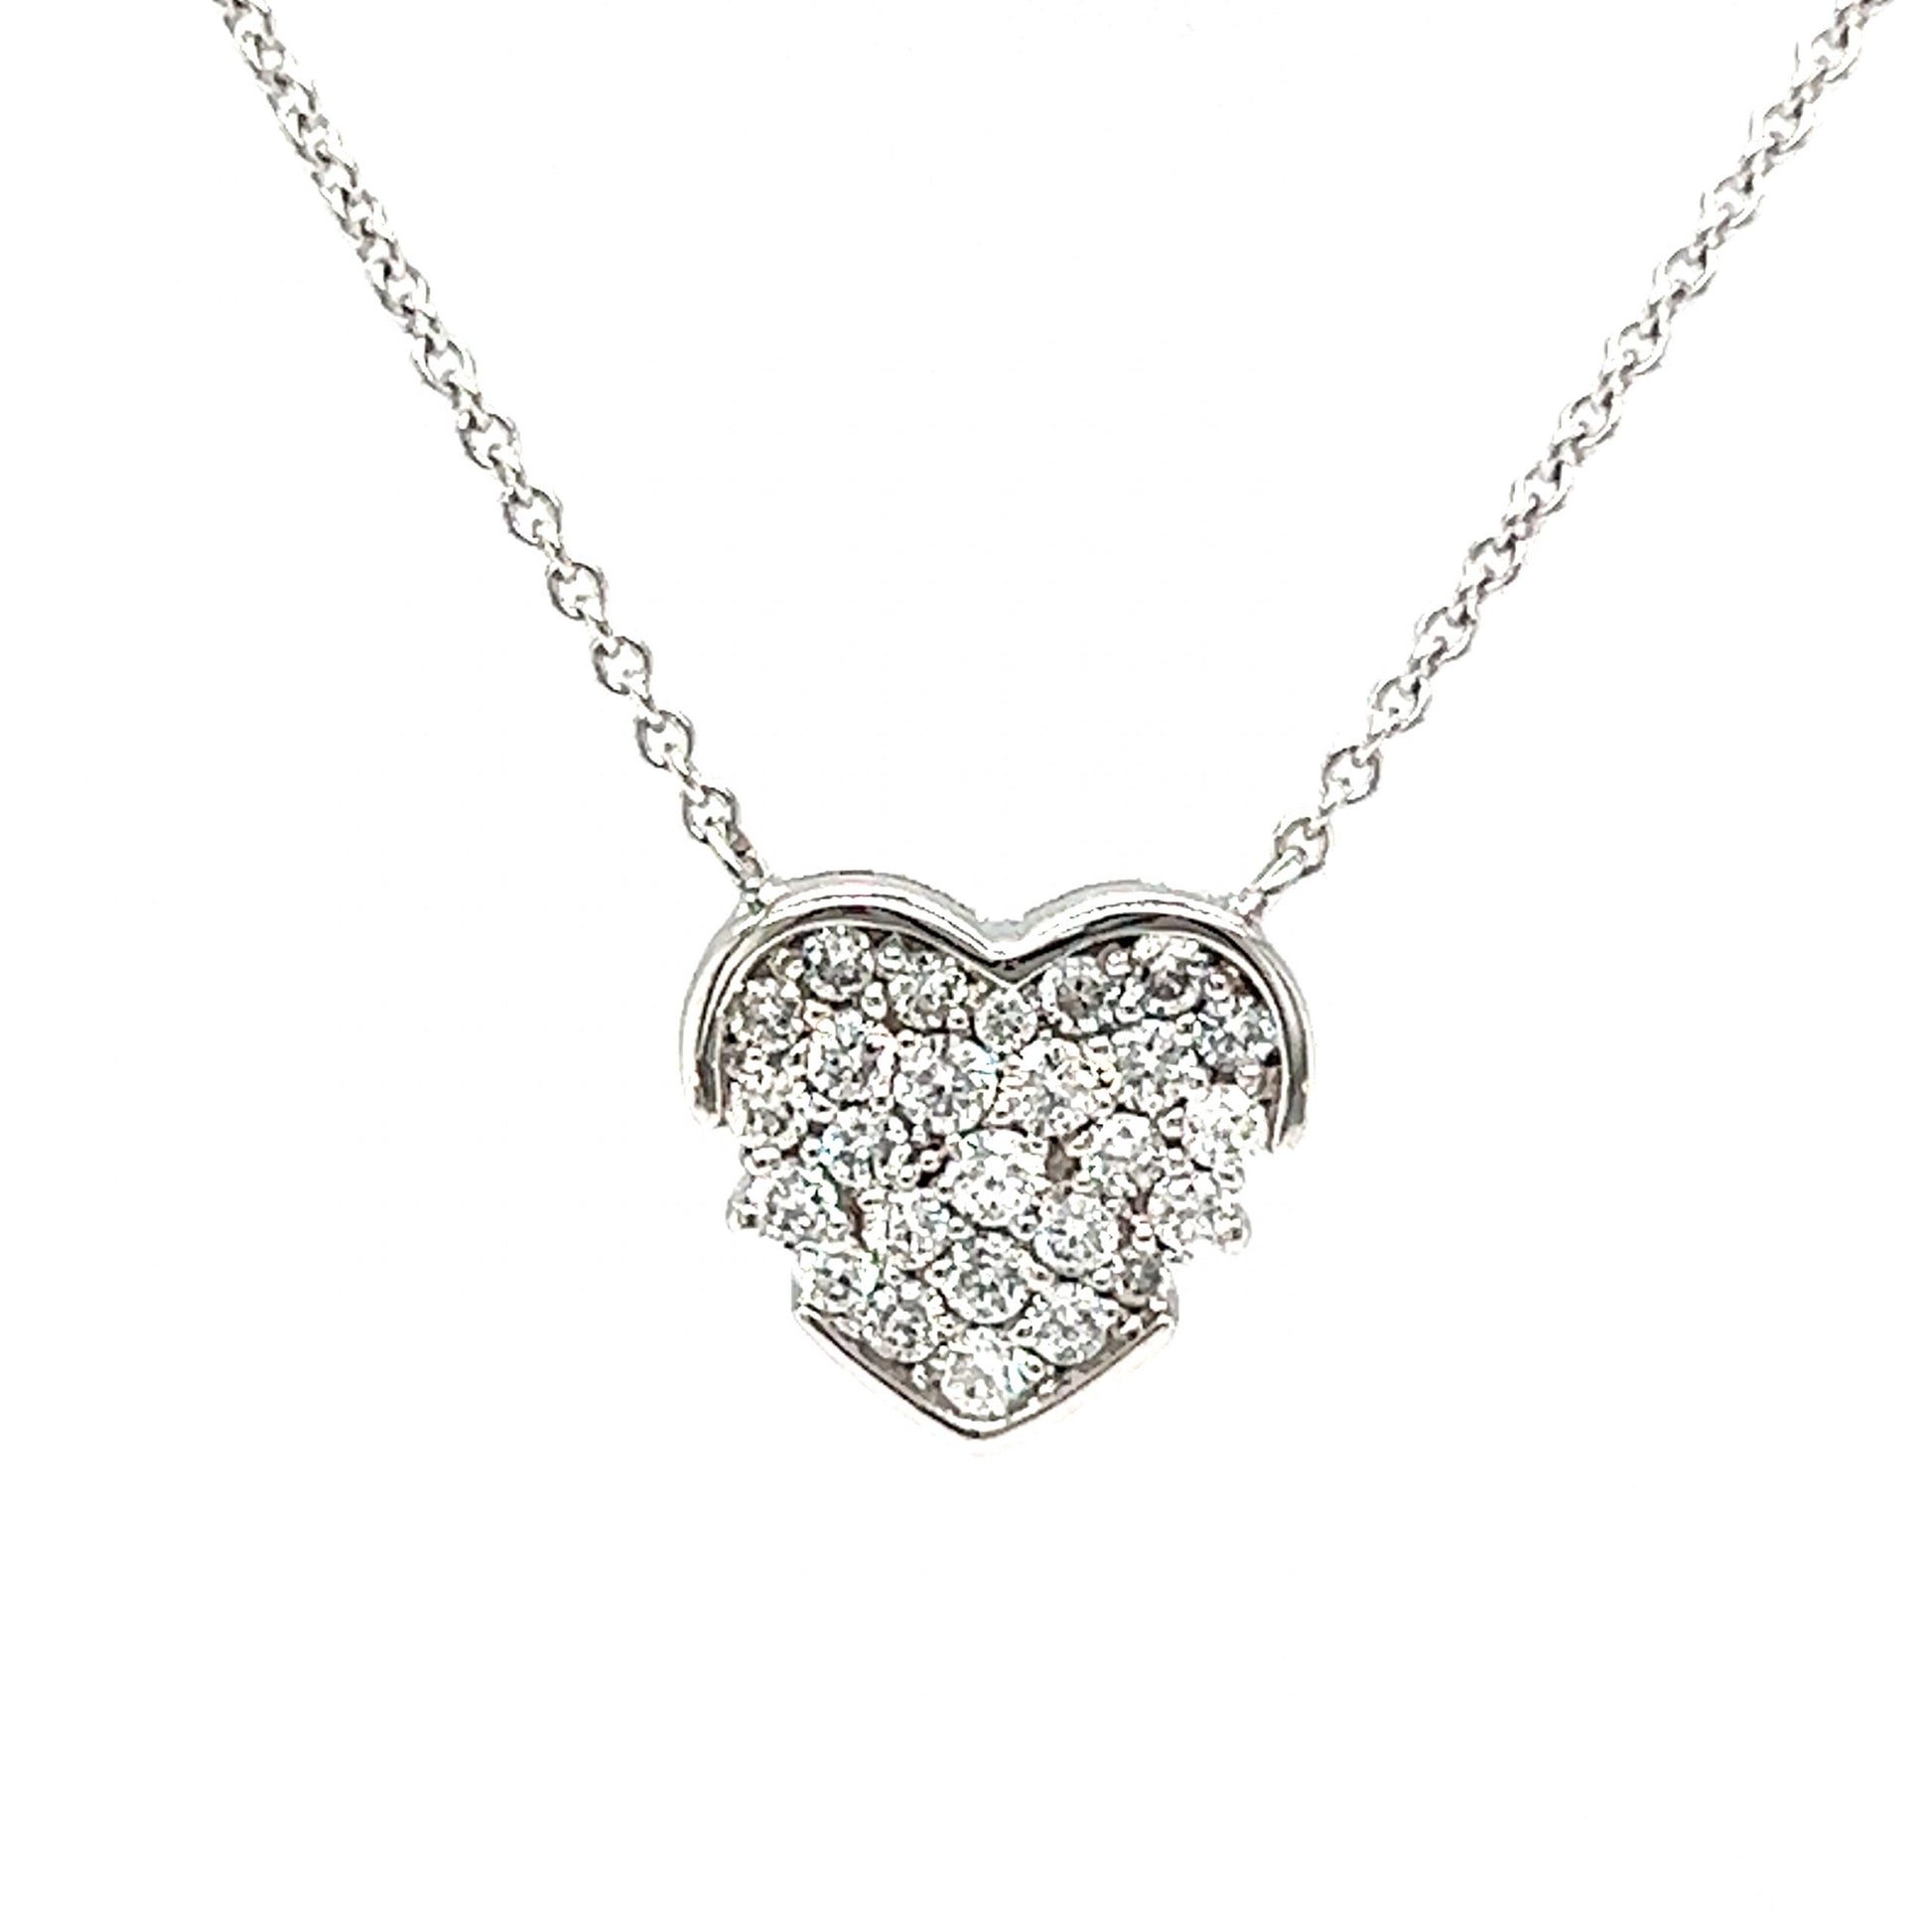 Pave Diamond Heart Pendant Necklace in 14k White Gold